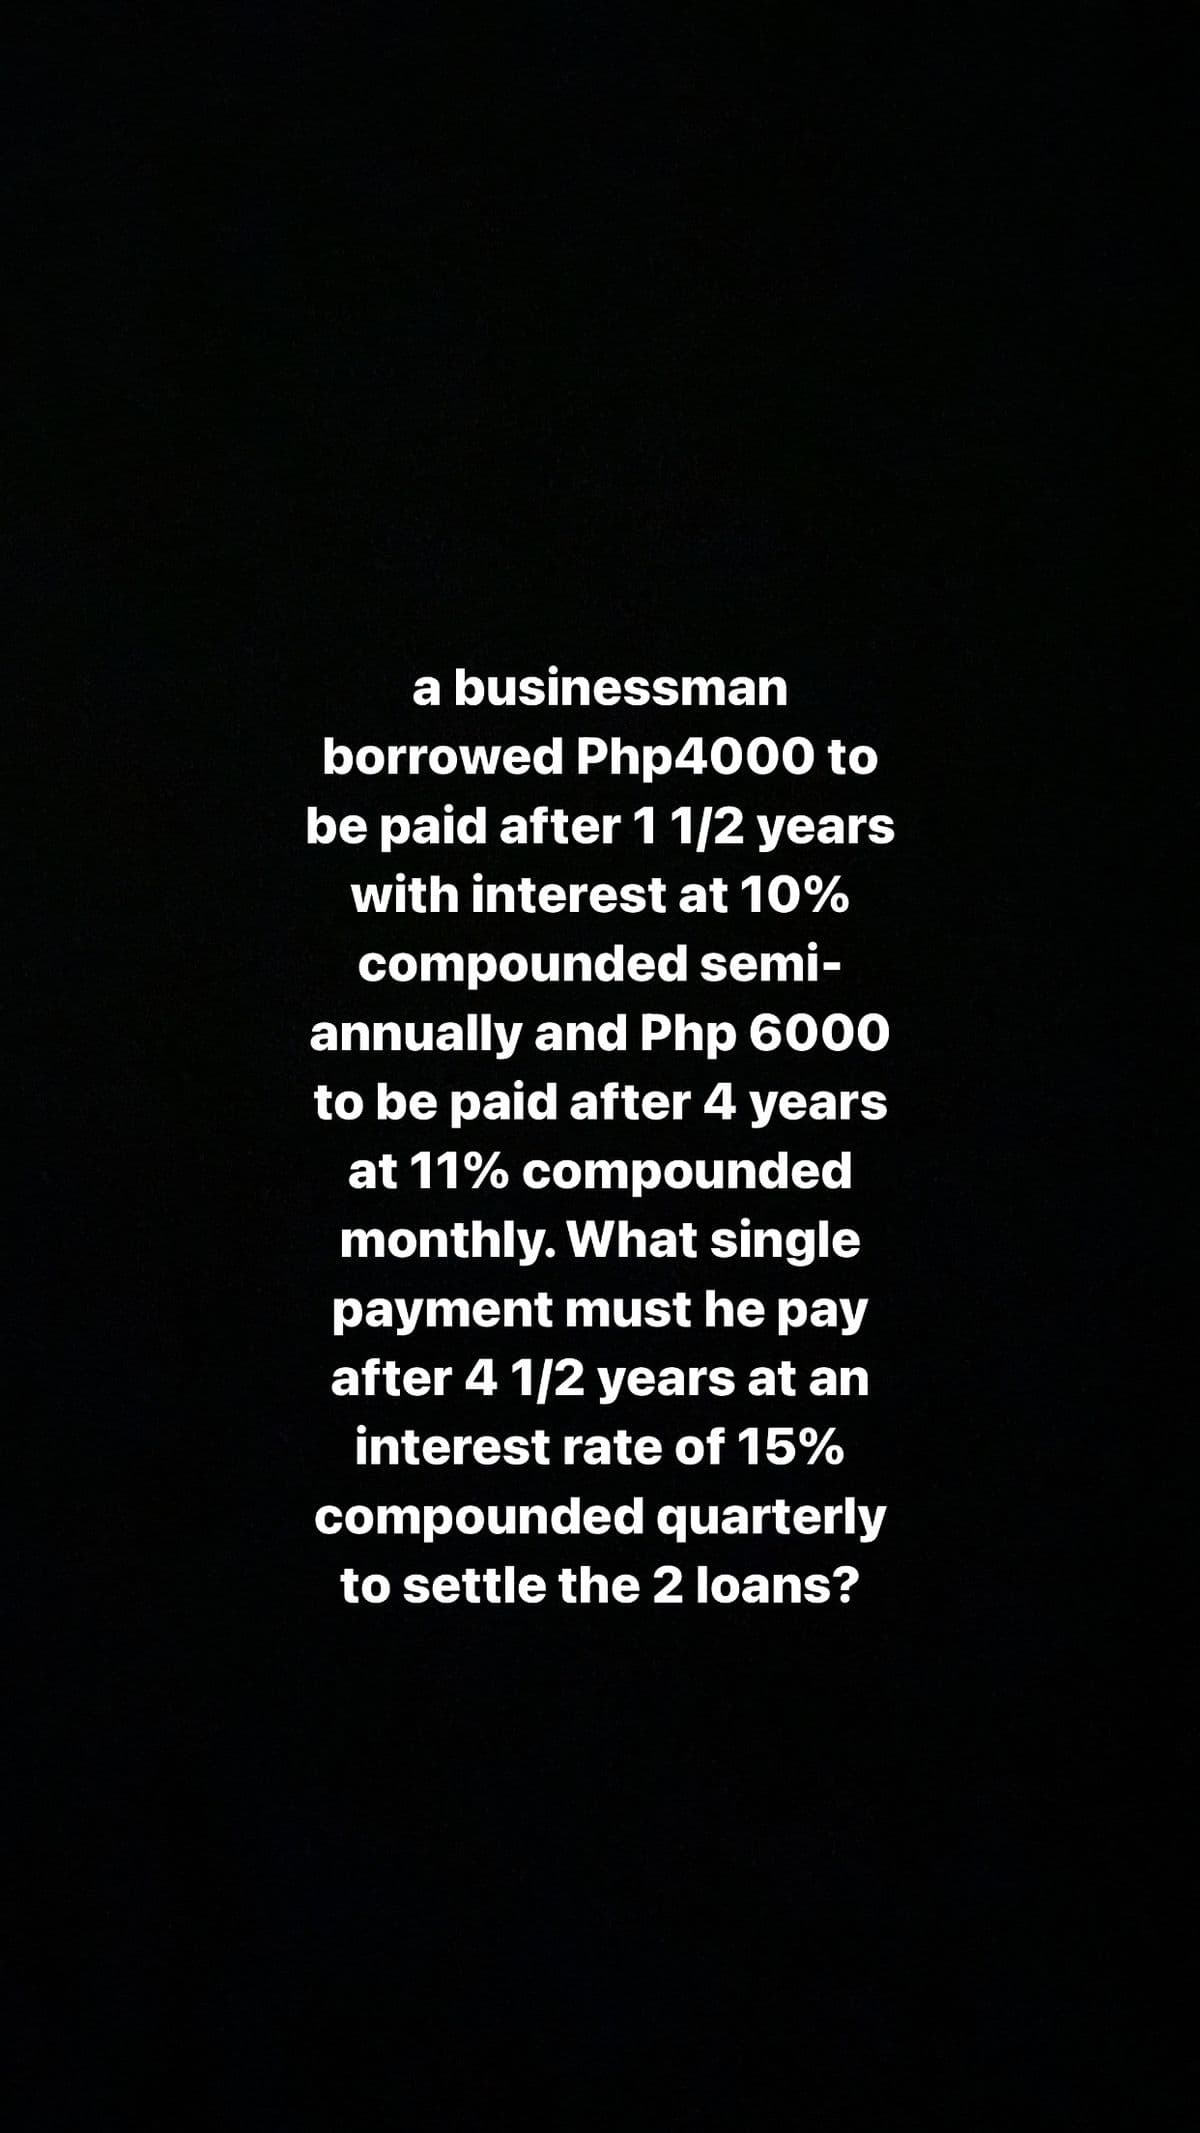 a businessman
borrowed Php4000 to
be paid after 11/2 years
with interest at 10%
compounded semi-
annually and Php 6000
to be paid after 4 years
at 11% compounded
monthly. What single
payment must he pay
after 4 1/2 years at an
interest rate of 15%
compounded quarterly
to settle the 2 loans?
